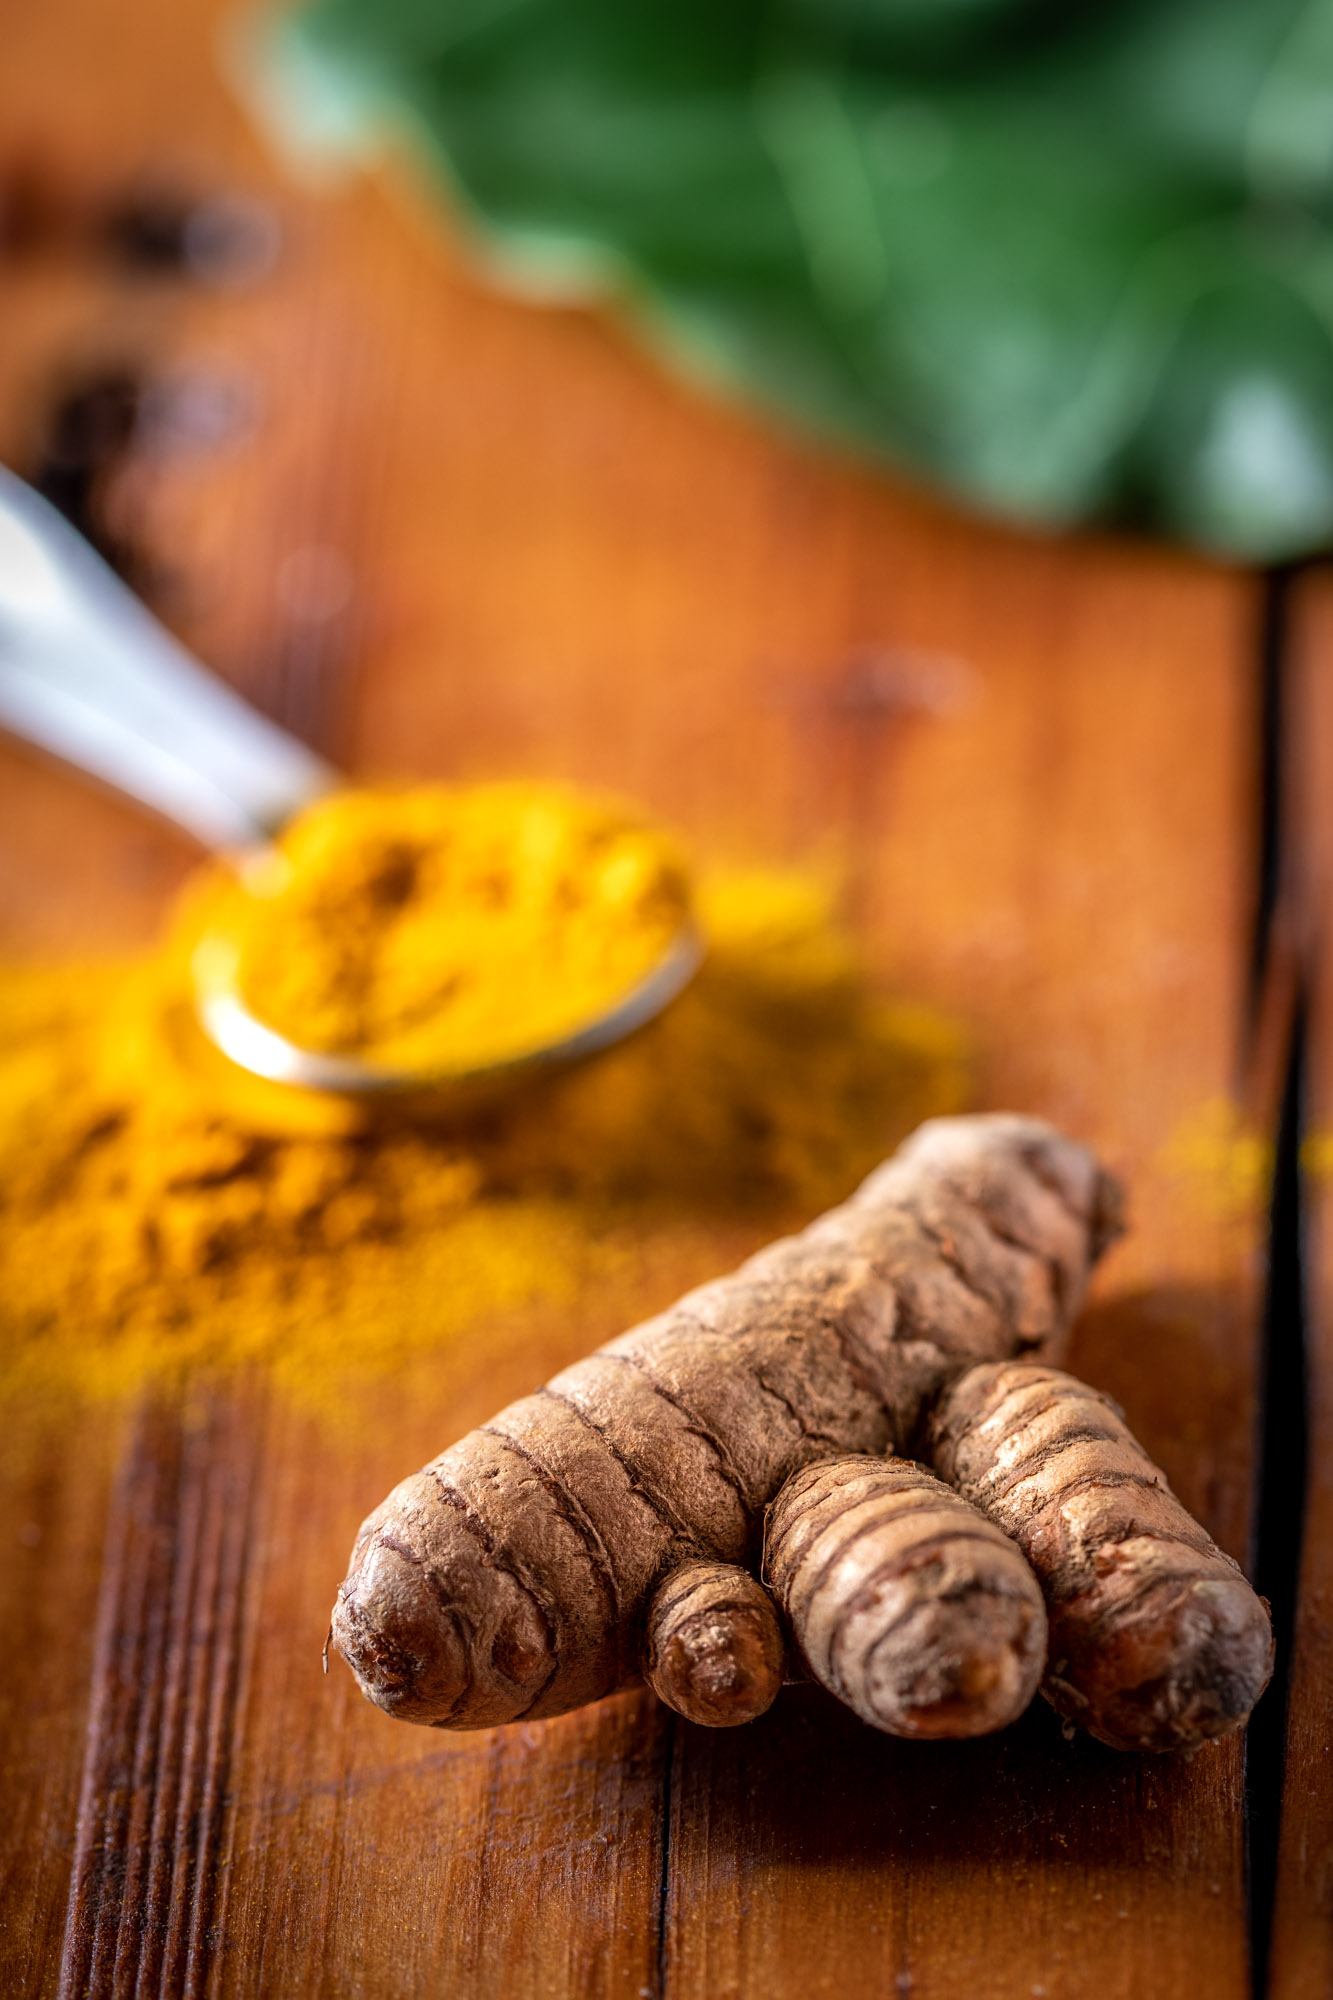 fresh turmeric is an ingredient used in this recipe